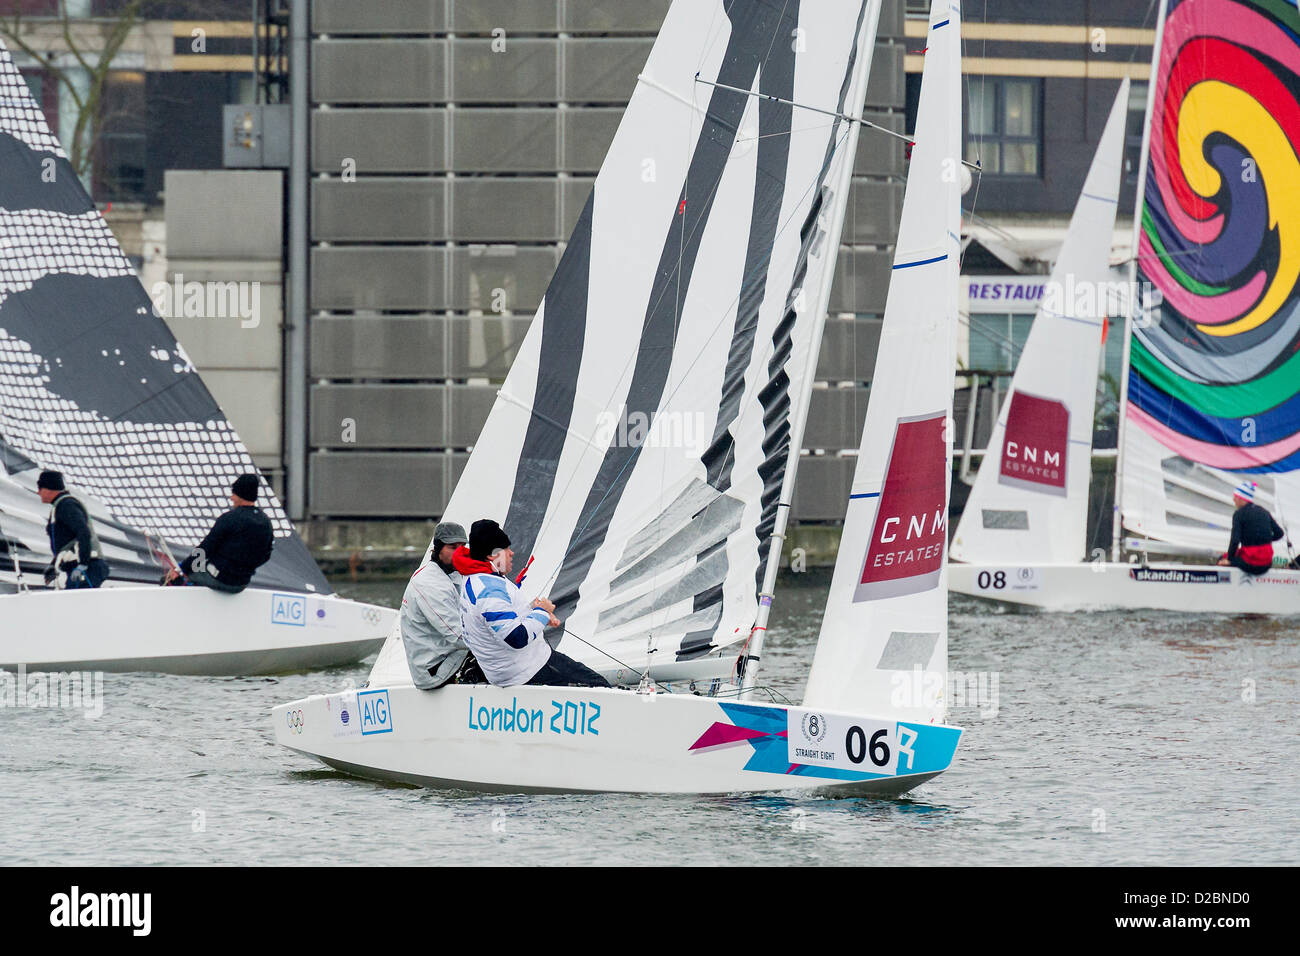 Star Class boats are raced by 20 Olympic and World champion sailors – including triple Olympic medalist Iain Percy (pictured C), double Olympic medalist Andrew Simpson (pictured C), Olympic medalists Pippa Wilson, Ian Walker, Luke Patience and Xavier Rohart .  They are using boats with sails designed by a range of artists -  Eine, Julian Opie, Goldie and David Begbie. This is the first time sailing and art has been brought together in a match racing series. The London Boat Show, Excel centre, Docklands, London, UK 19 January 2013. Stock Photo